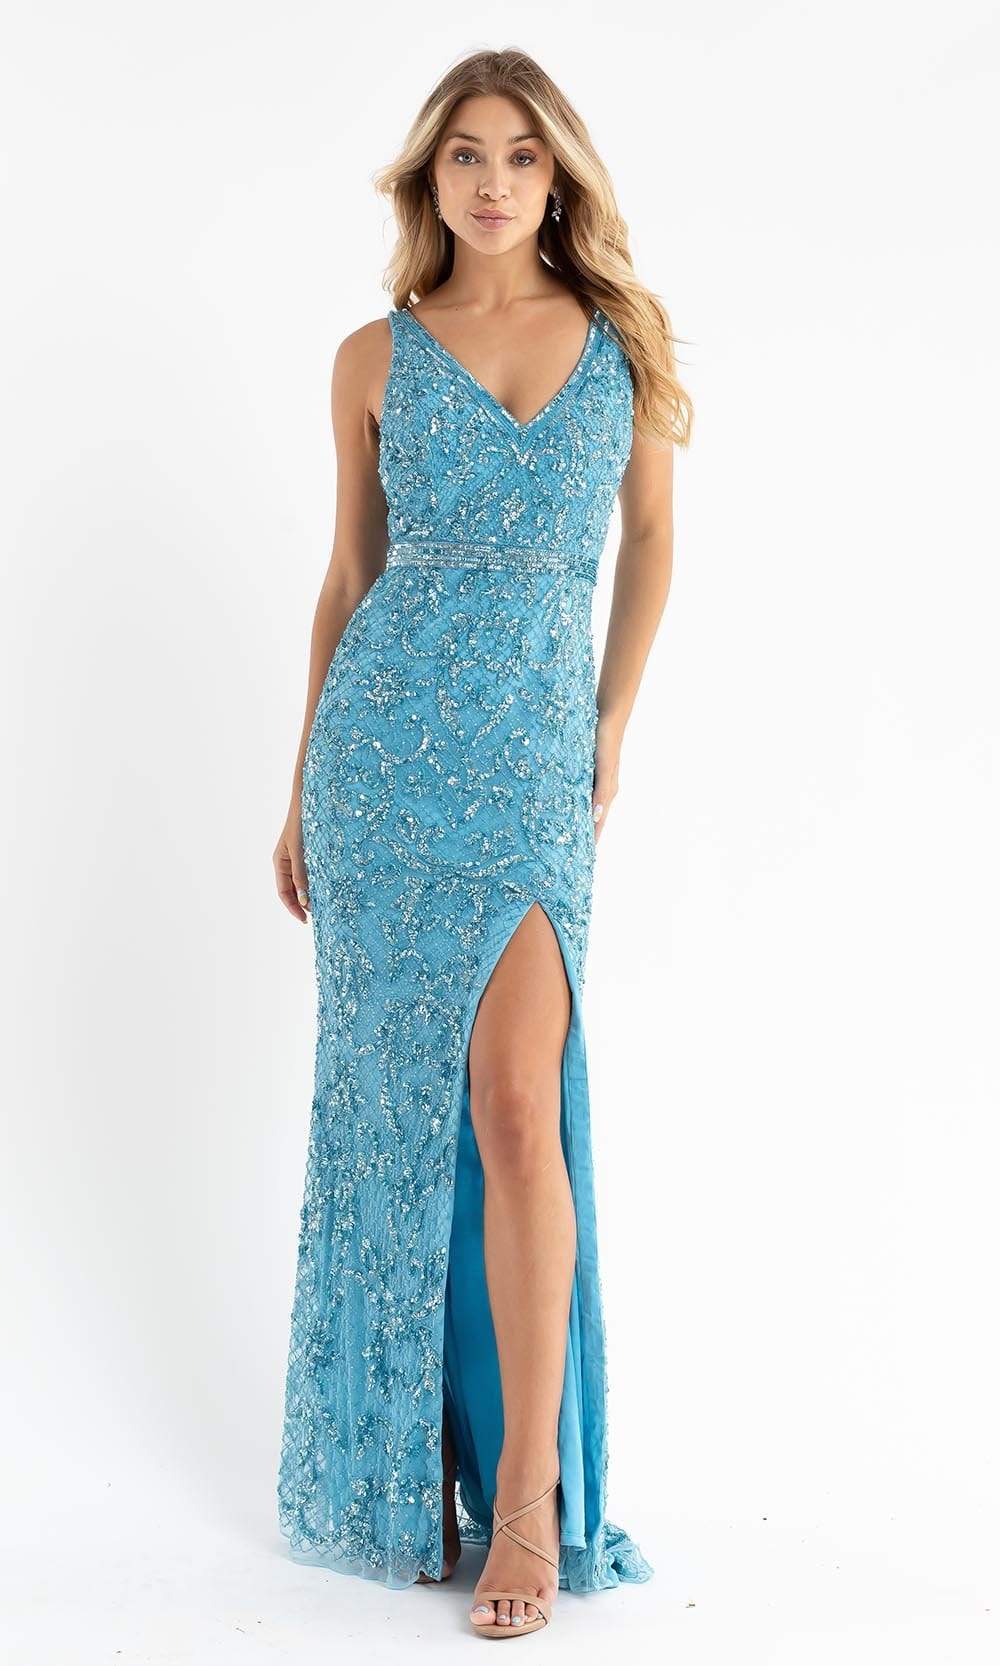 Image of Primavera Couture - 3764 Bold Style Low V Neckline Dazzling Silhouette Evening Gown